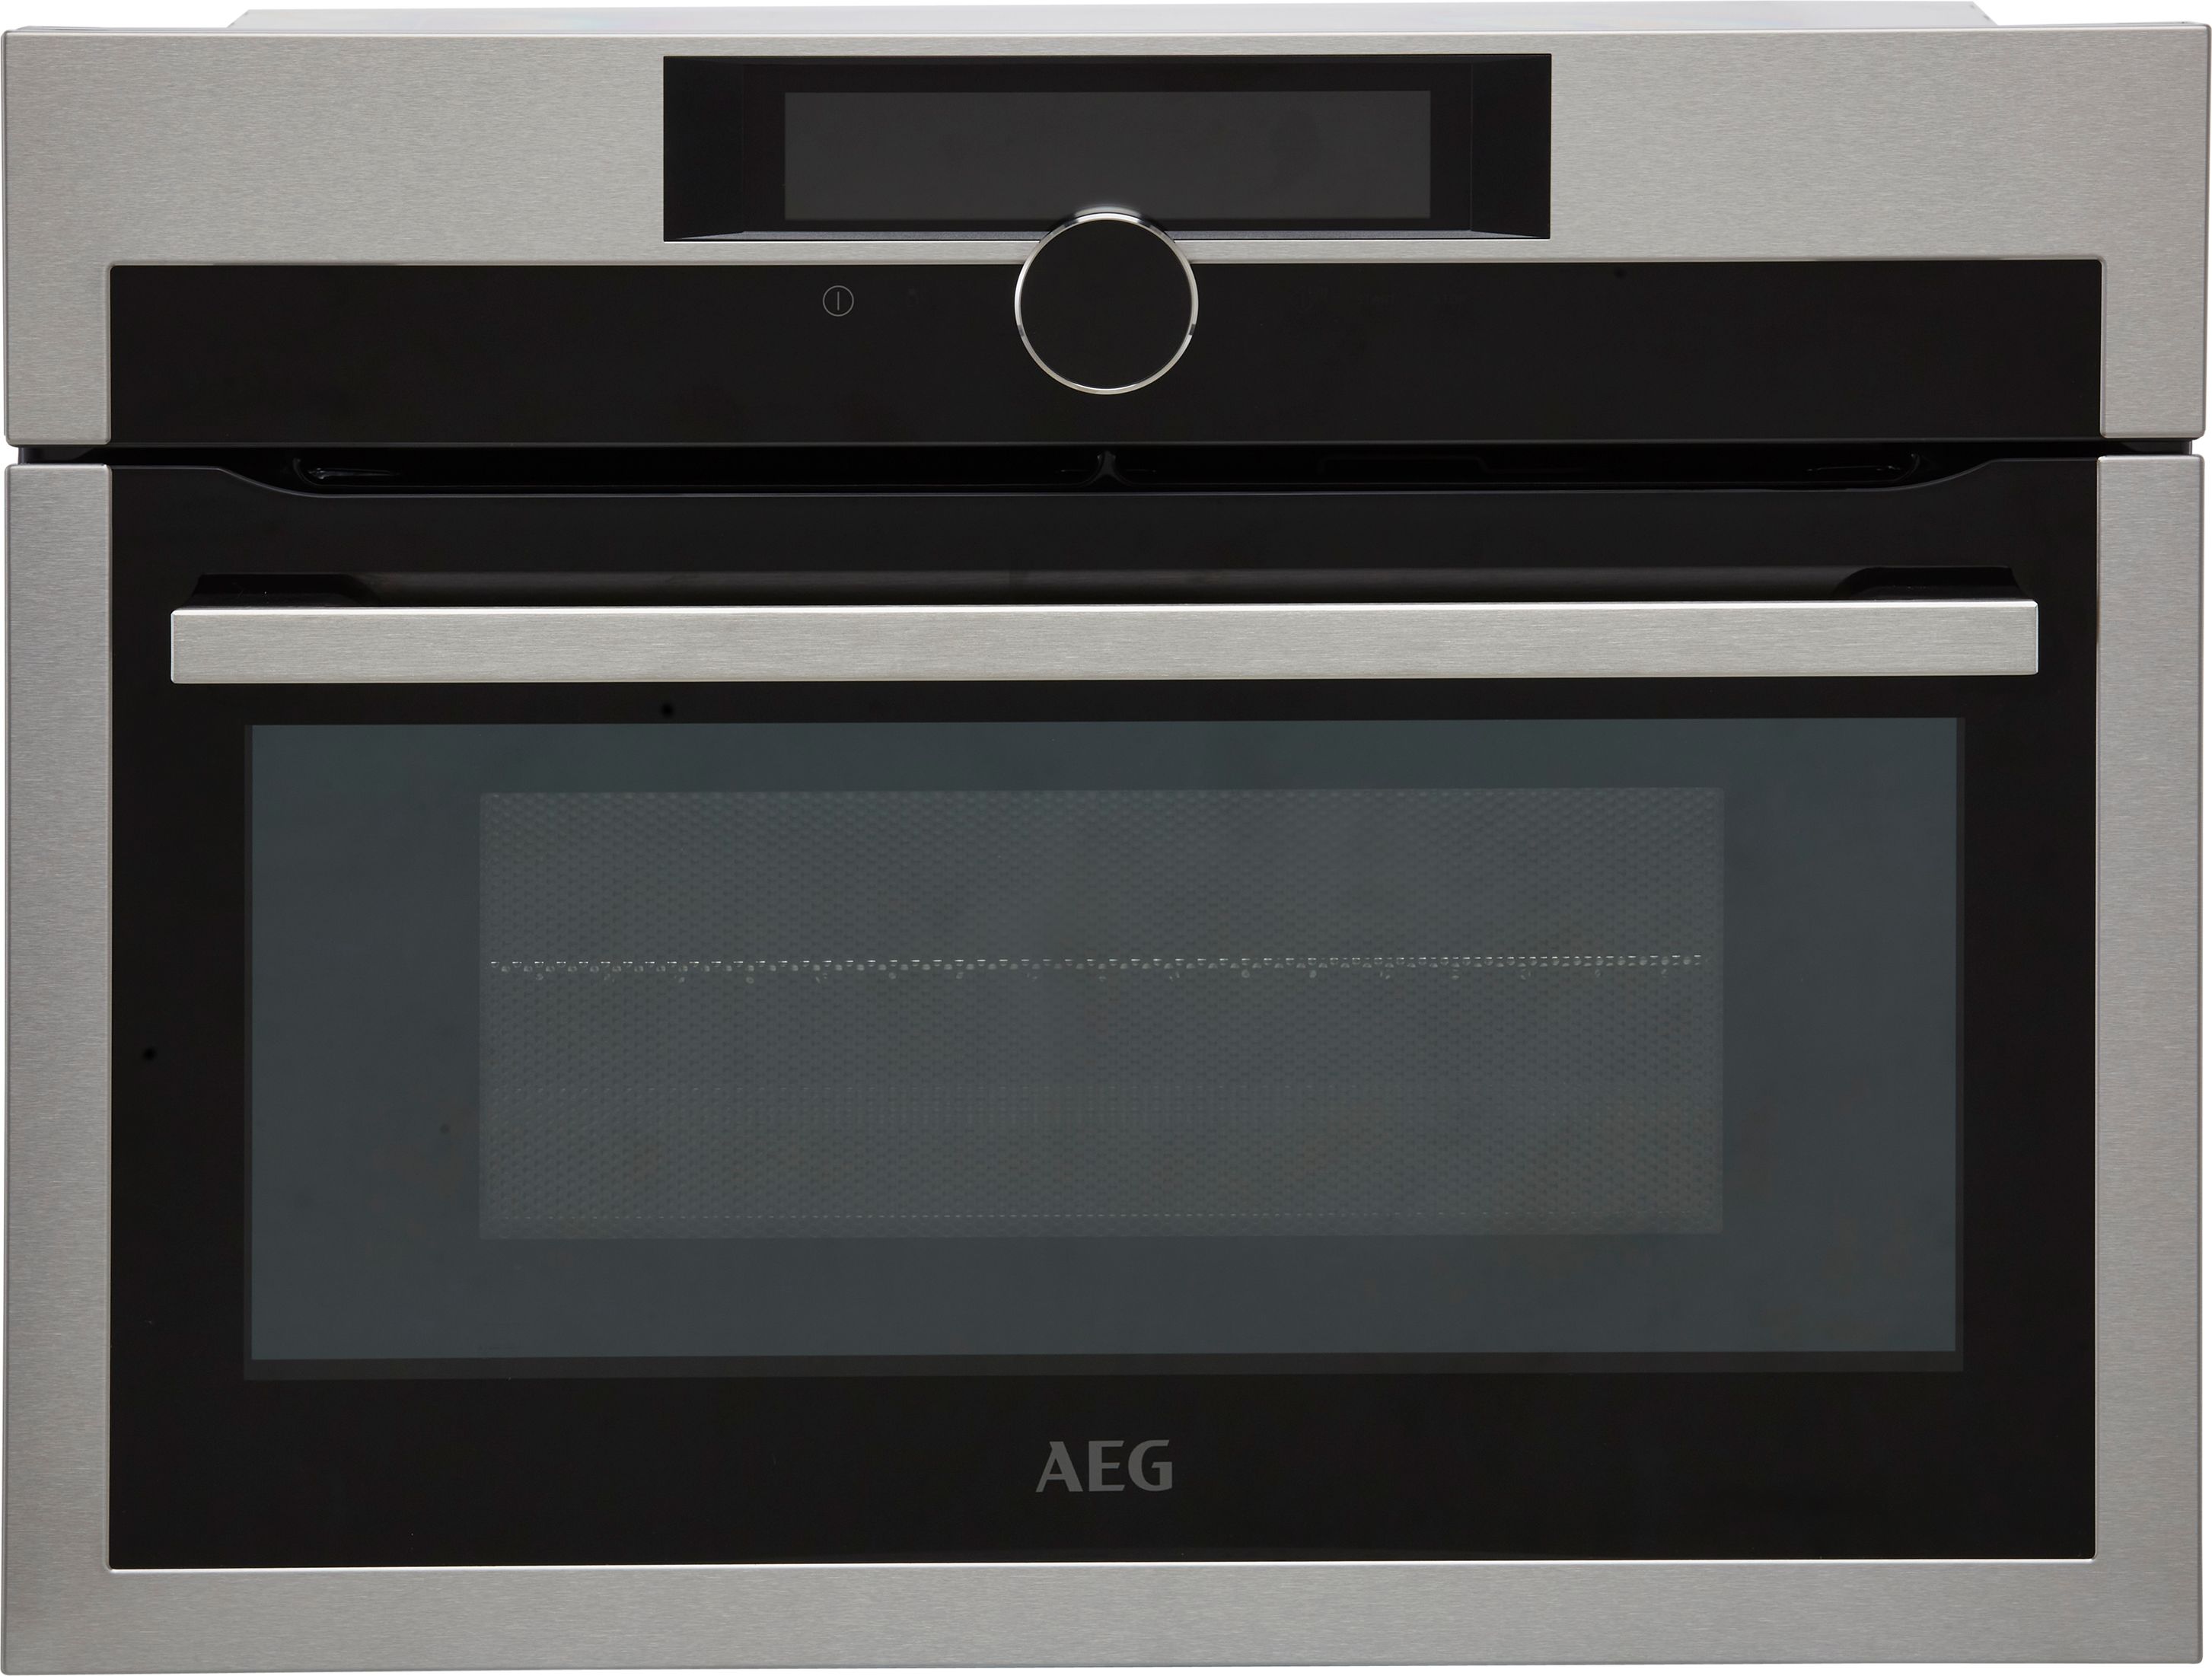 AEG KME968000M Built In Compact Electric Single Oven with Microwave Function - Stainless Steel, Stainless Steel